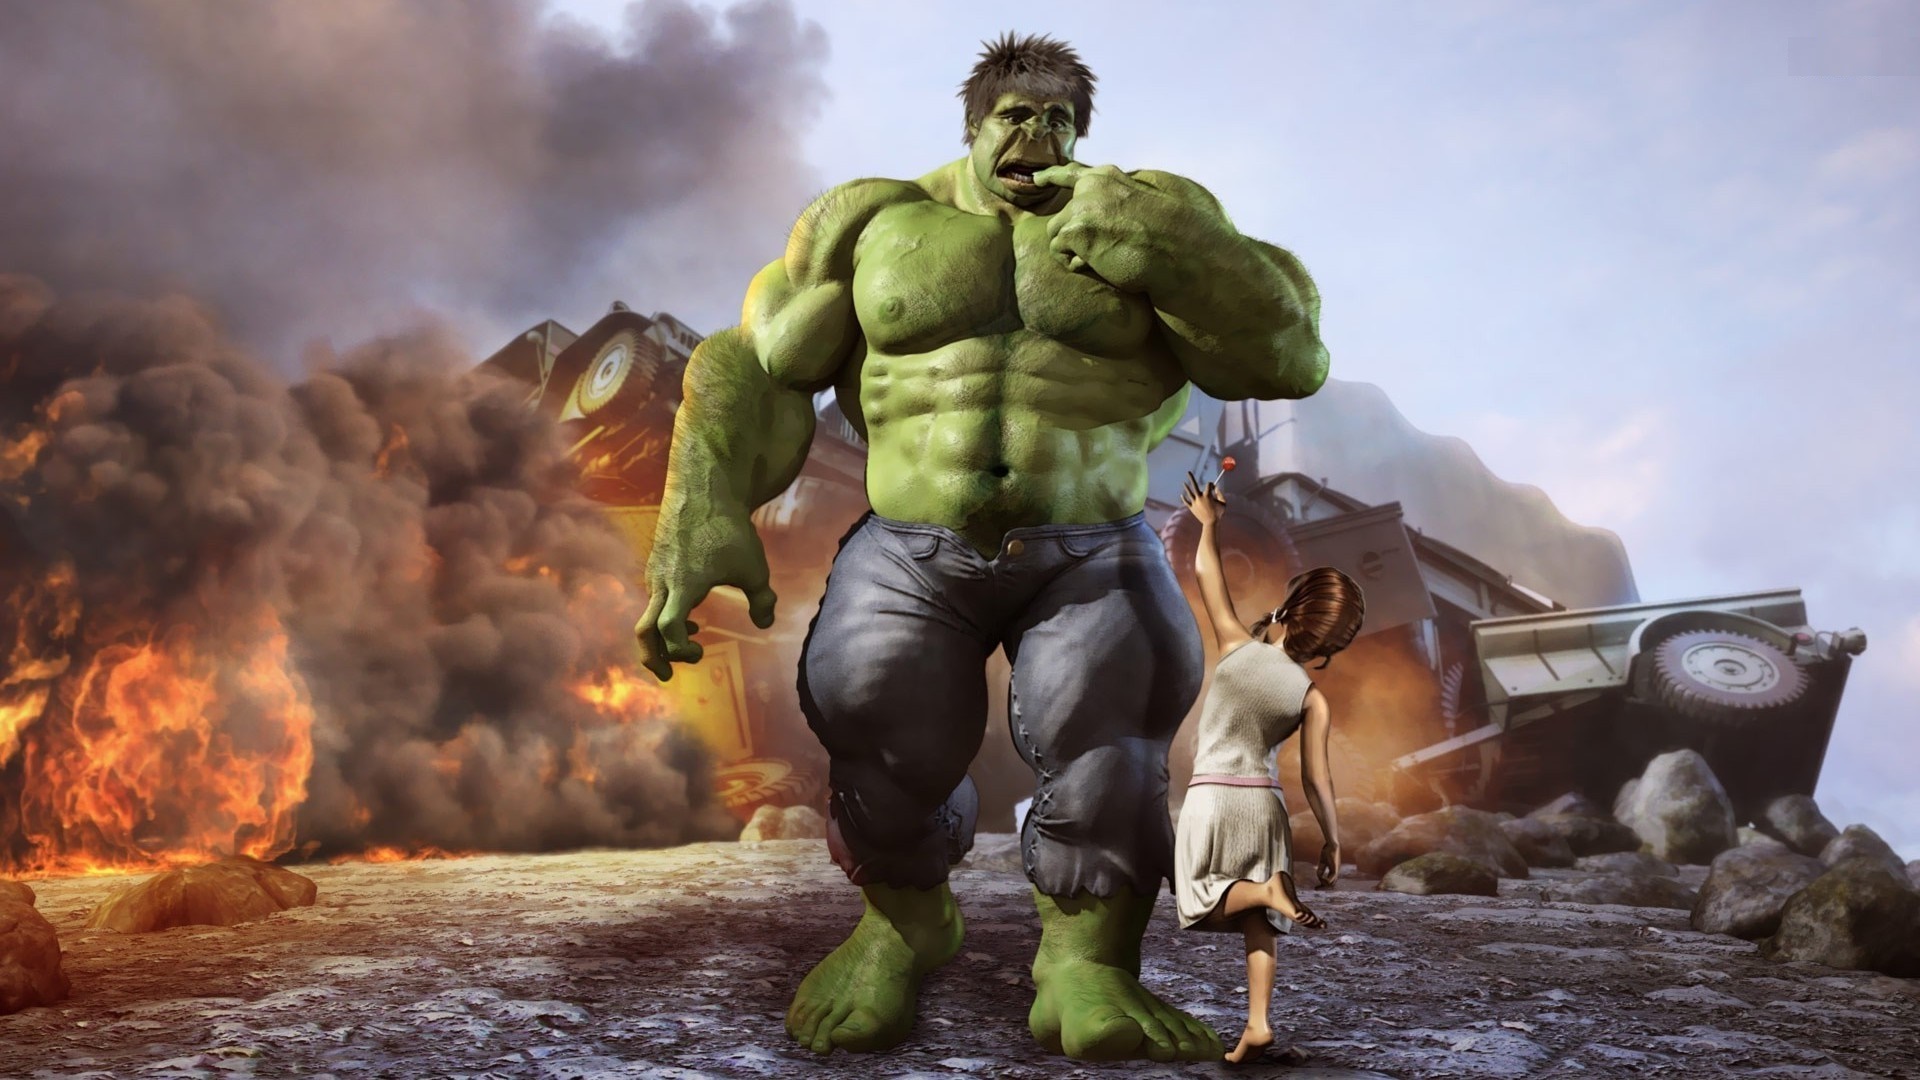 Hulk and little girl with a lollipop wallpapers 1920x1080.